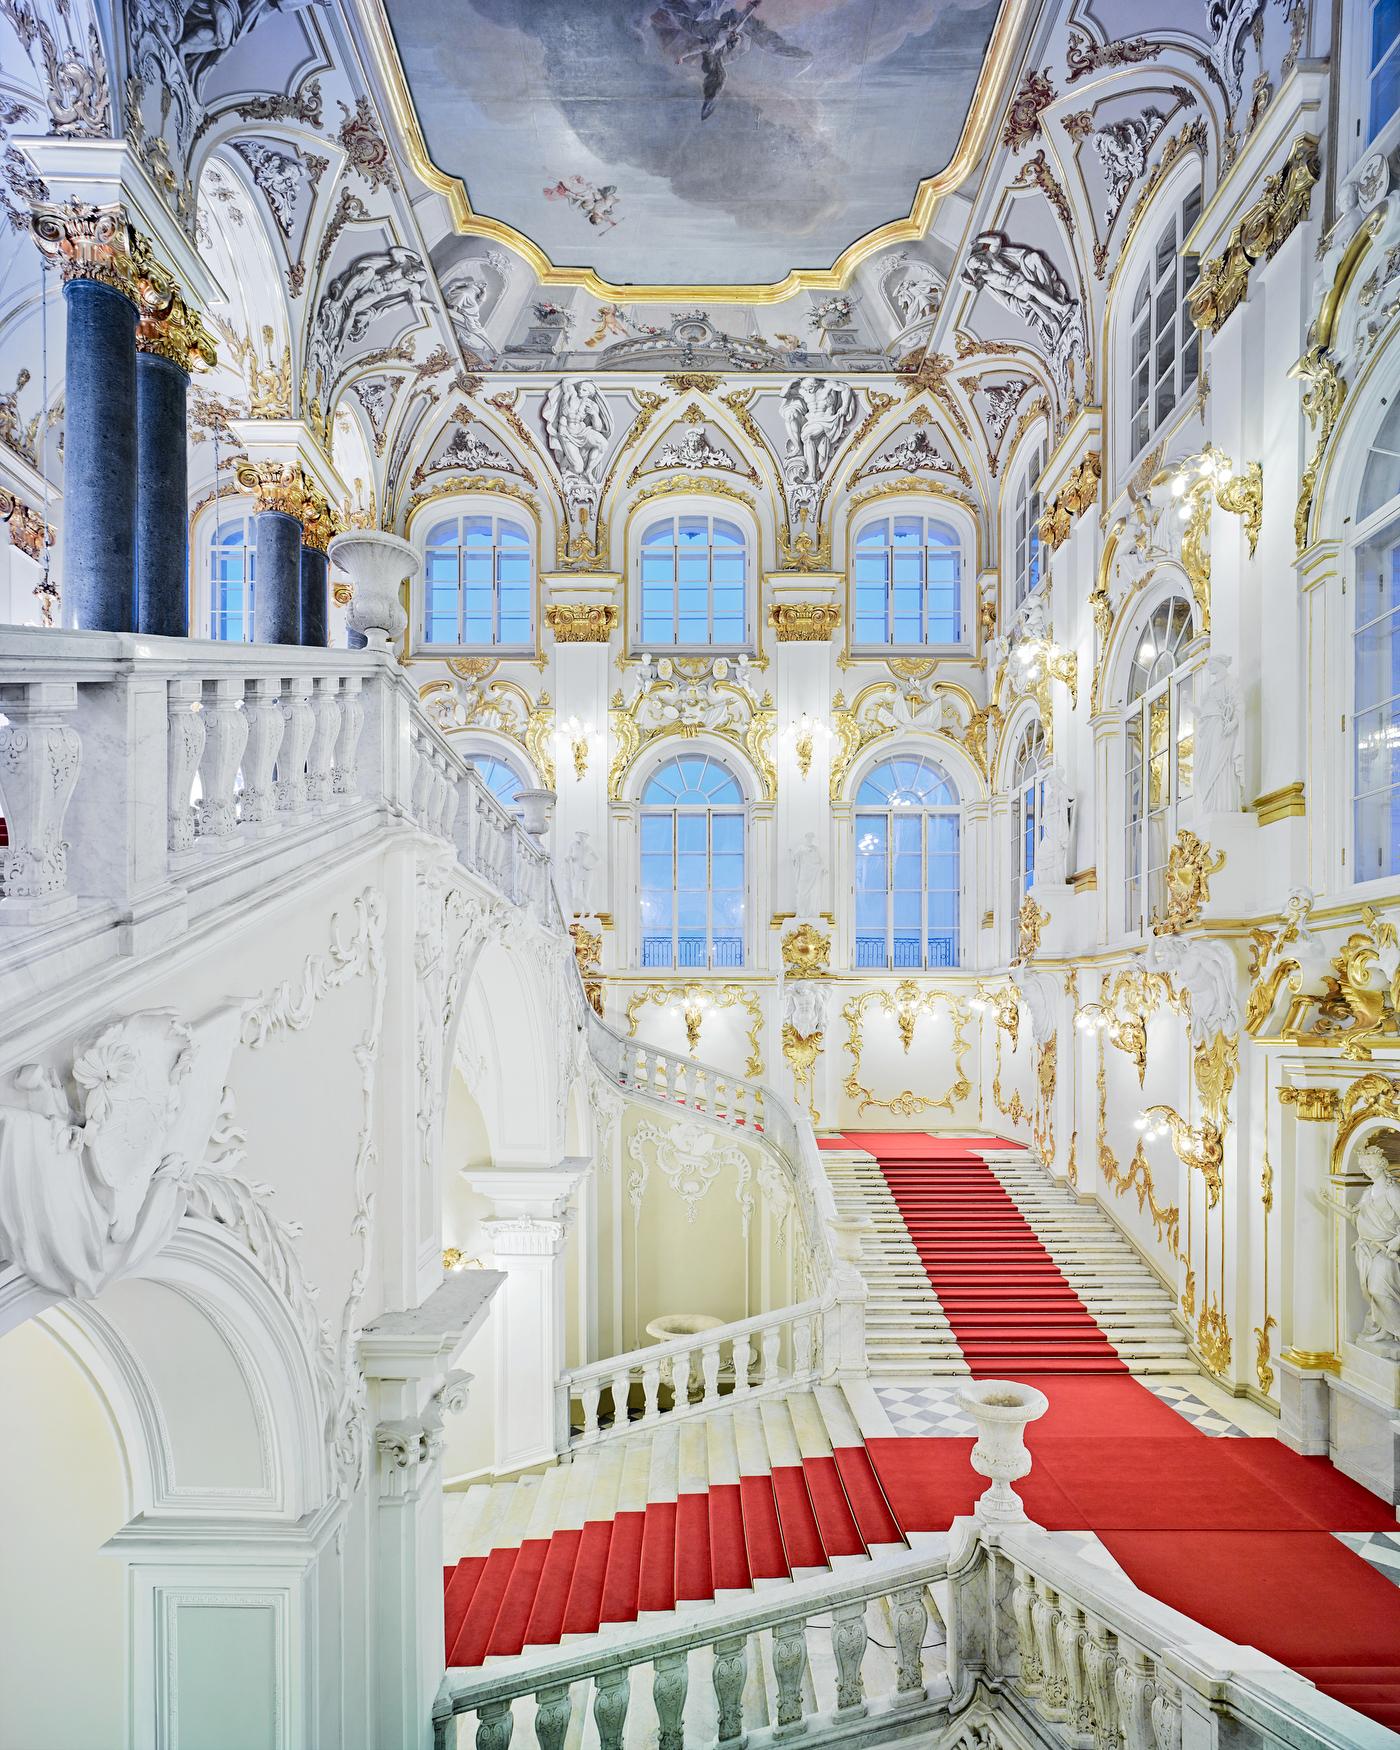 Title: Jordan Stairs I, State Hermitage, St Petersburg, Russia

All available sizes & editions for each size of this photograph:
21” x 26" Edition of 7
32” x 40" Edition of 7

Burdeny’s Russia images, particularly in his photographs of the Moscow